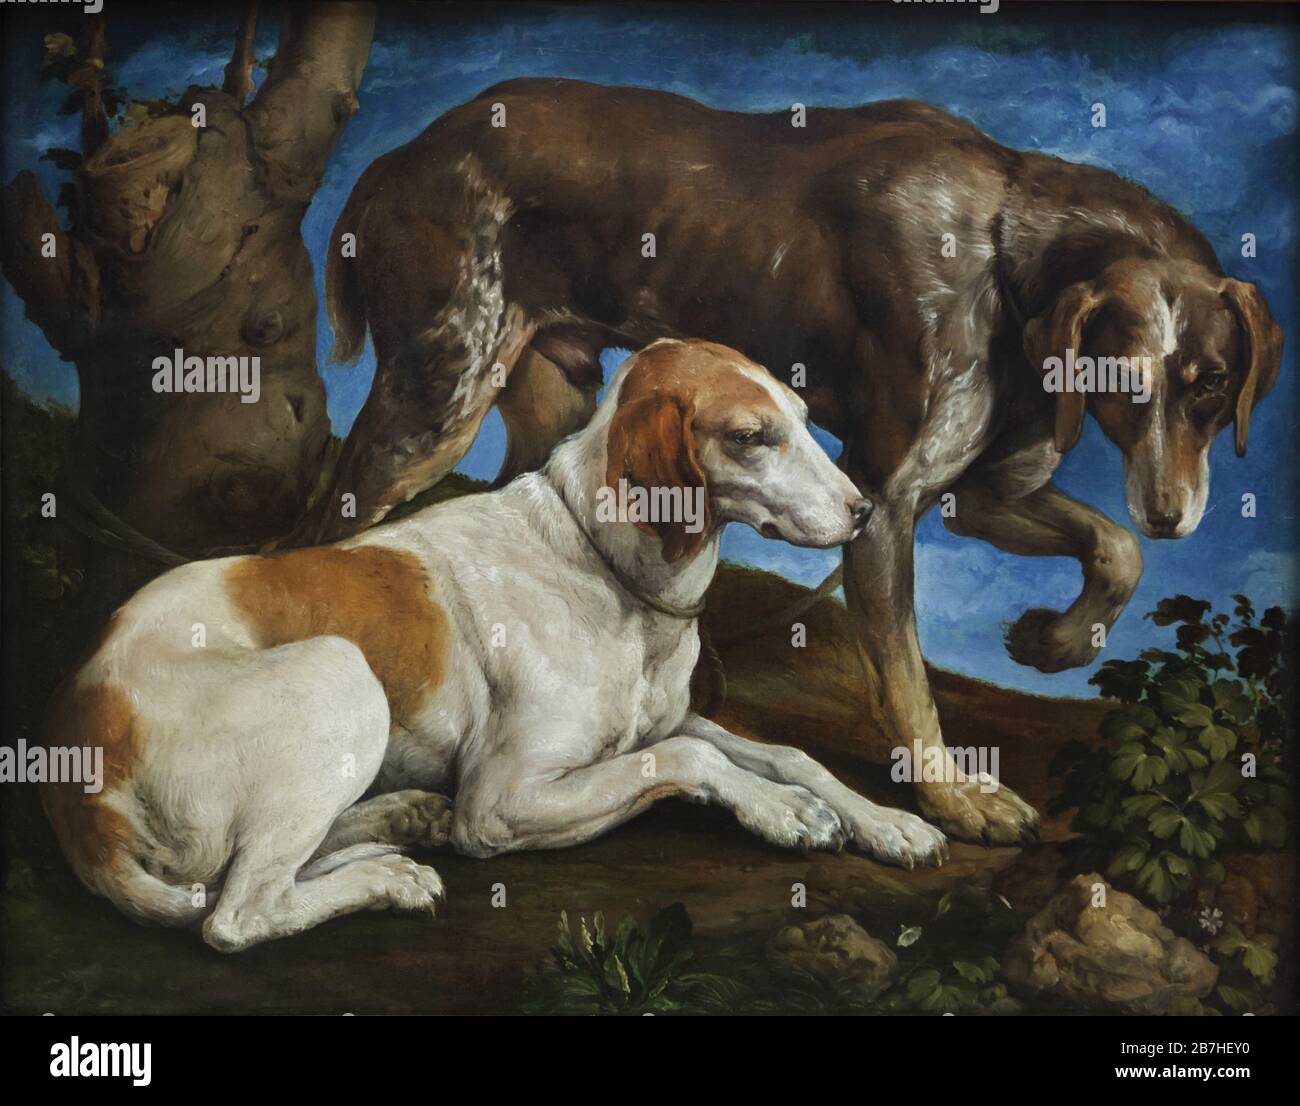 Painting 'Two hunting dogs tied to a tree stump' by Italian Renaissance painter Jacopo Bassano (1548) on display in the Louvre Museum in Paris, France. Stock Photo